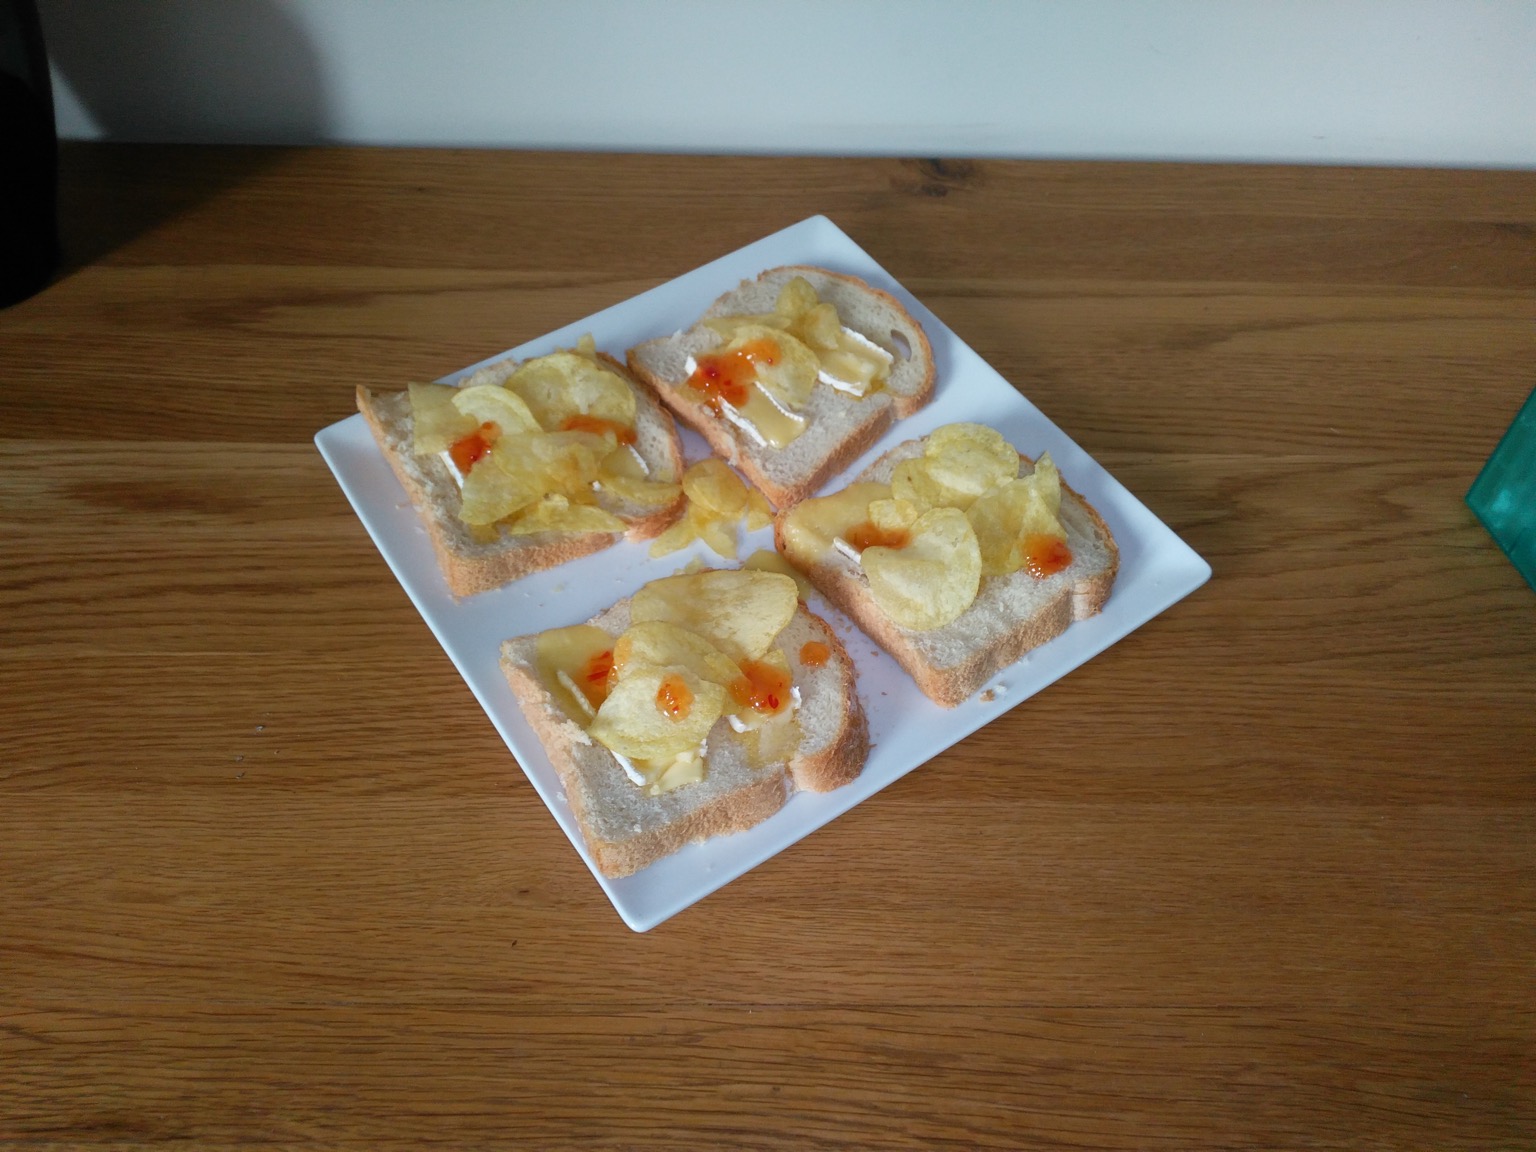 Crisps with brie and chili sauce on white bread